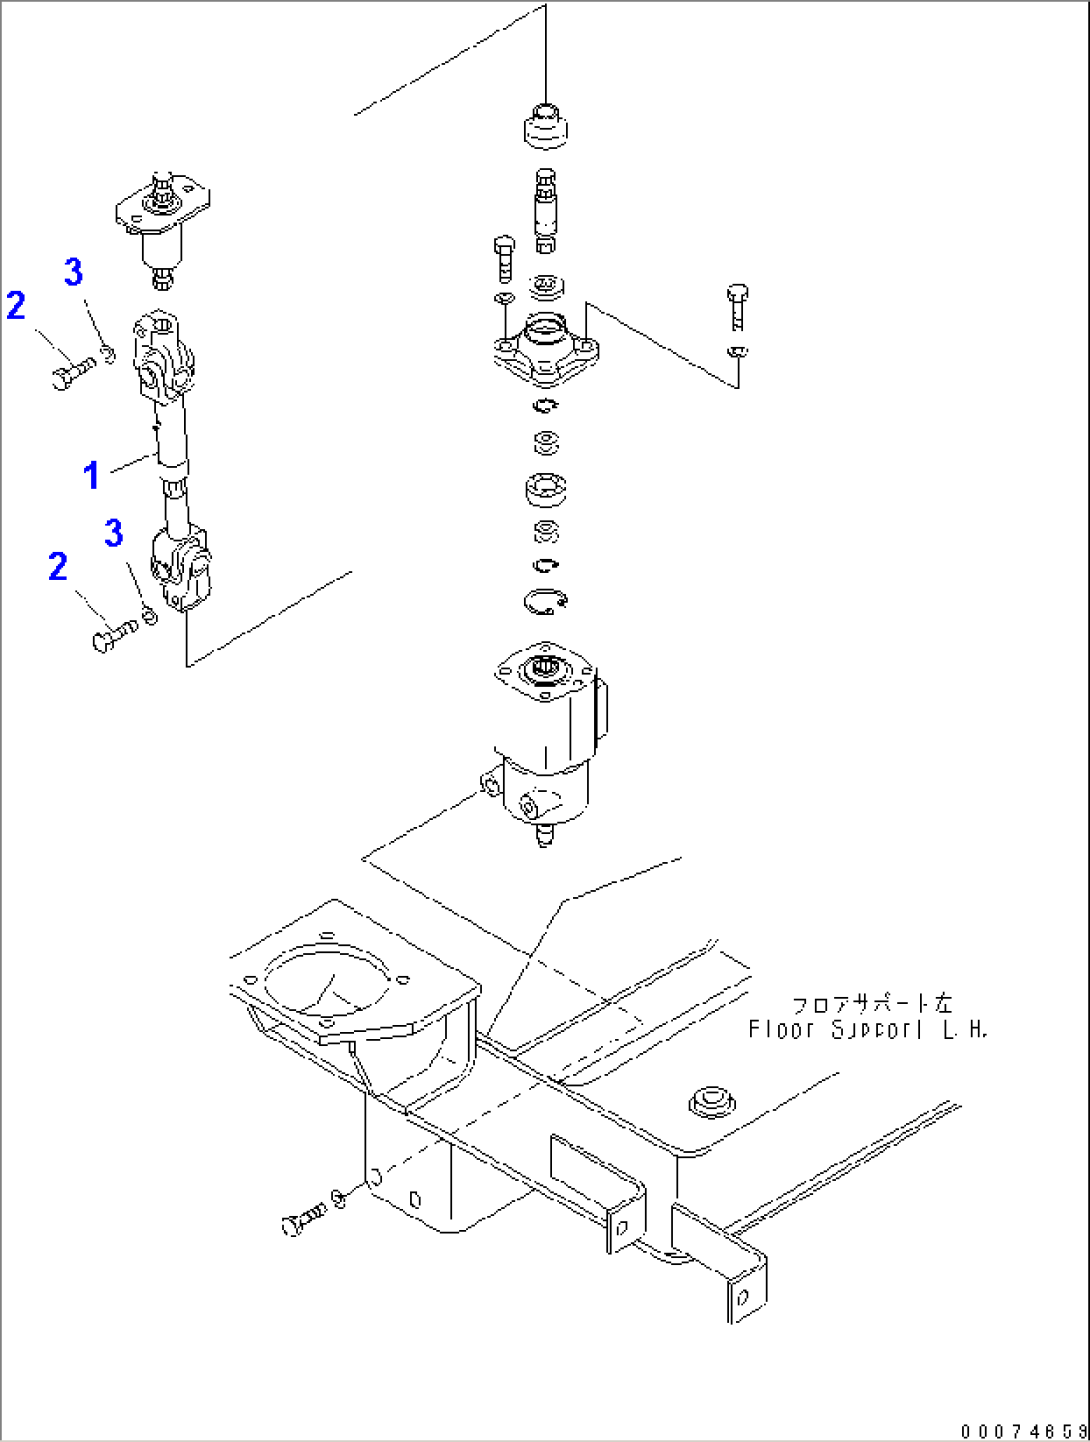 STEERING AND TRANSMISSION CONTROL (JOINT) (WITH ADVANCE JOY STICK STEERING)(#51075-)